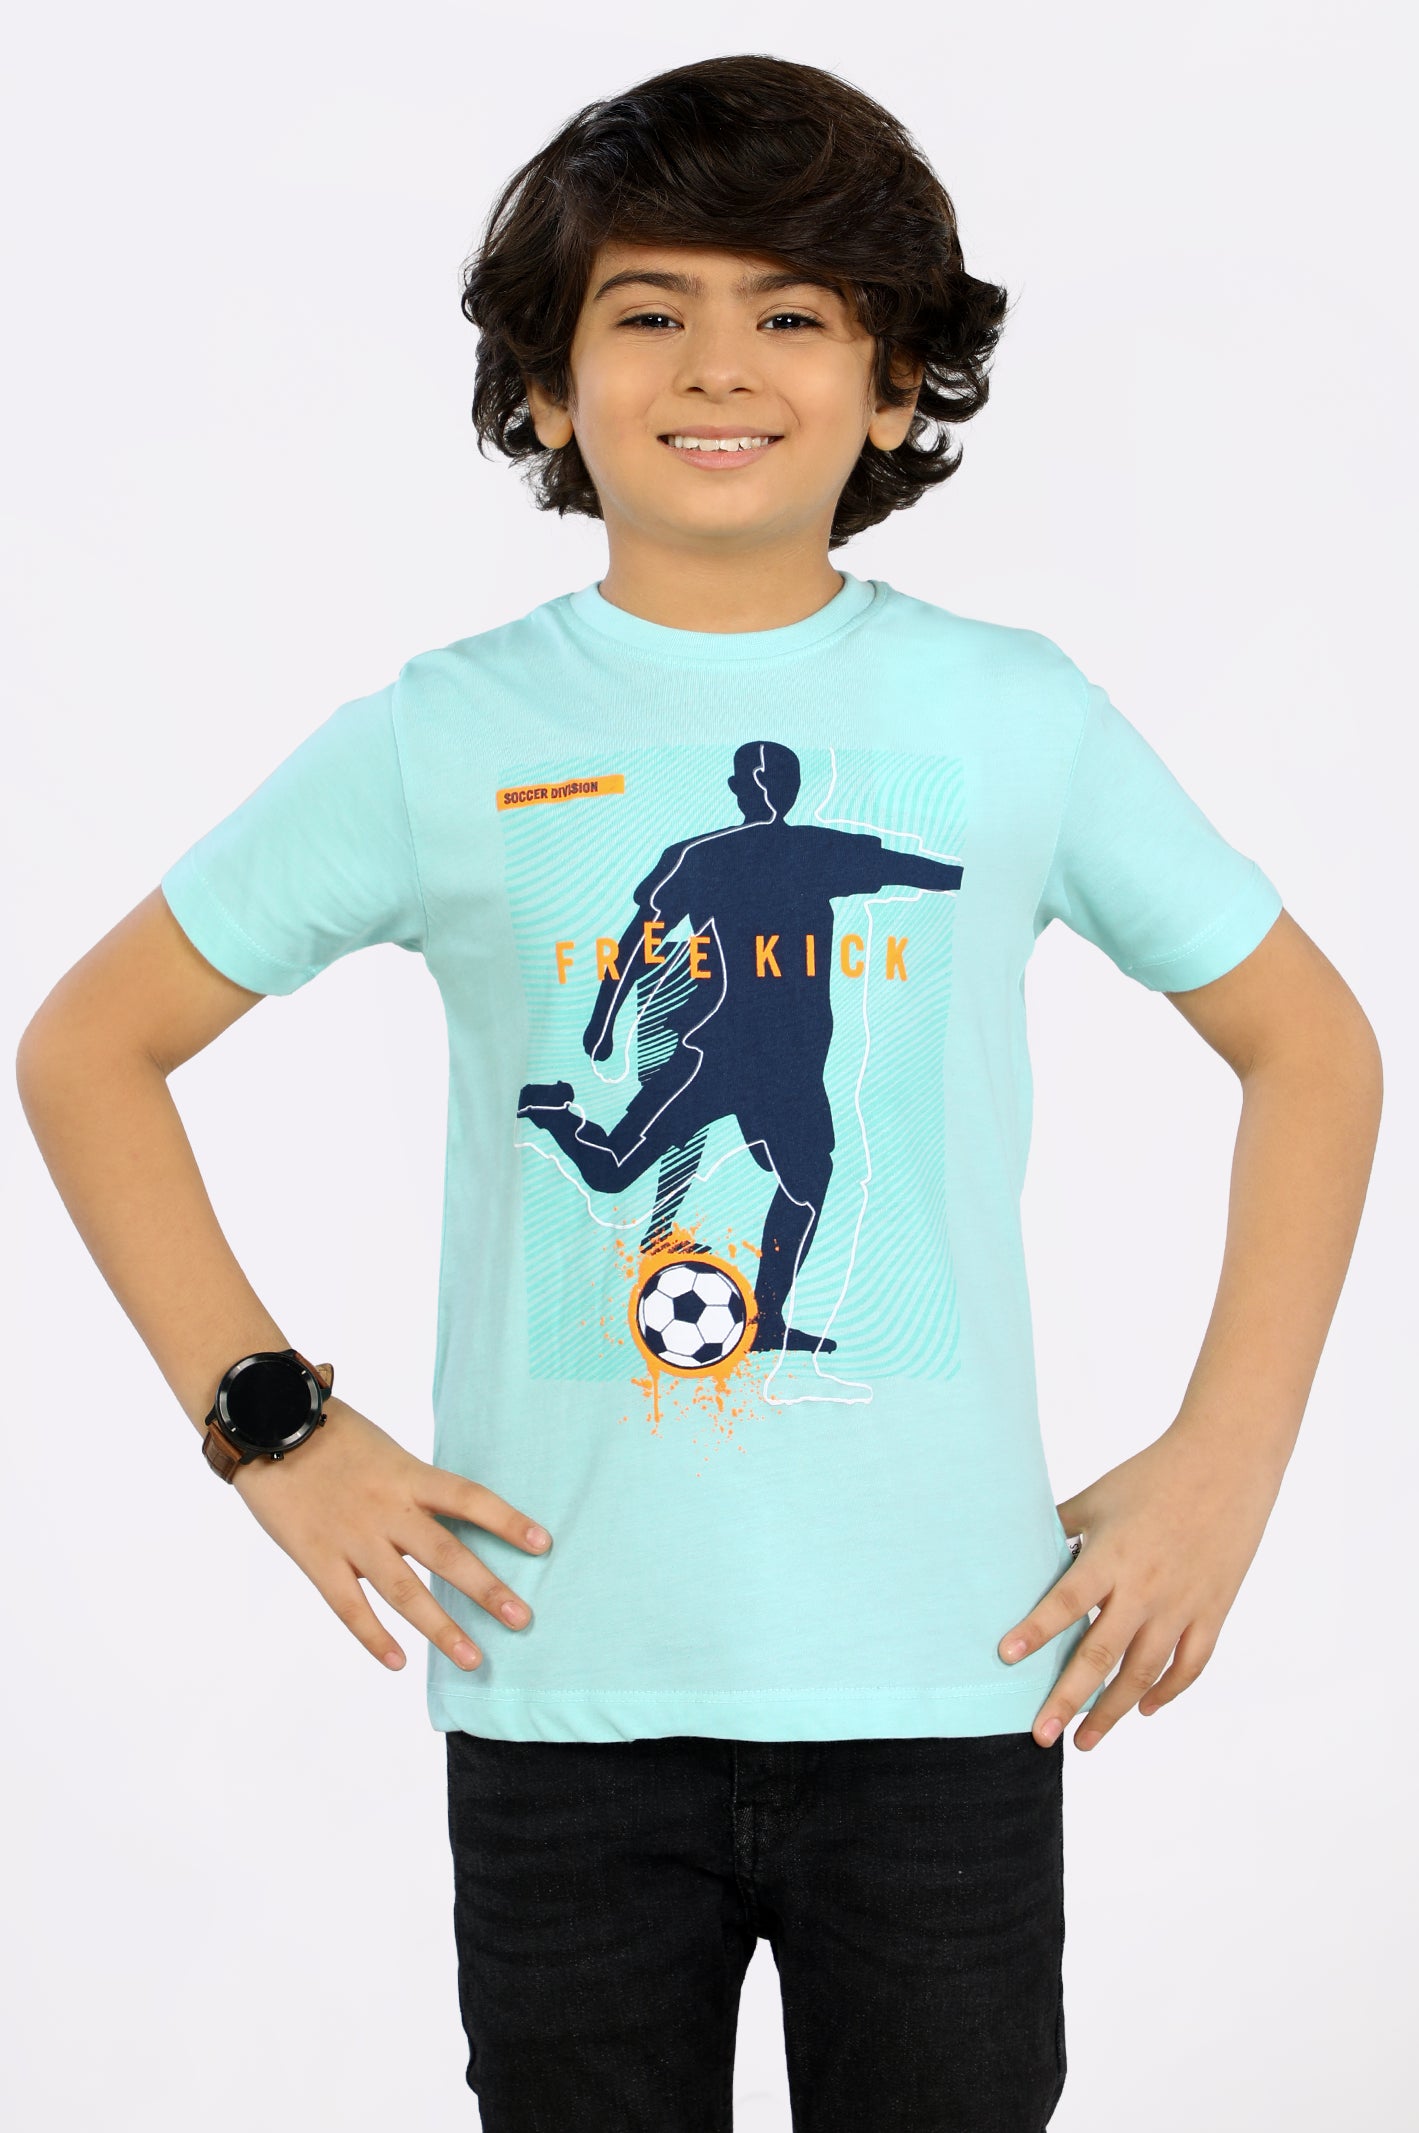 Soccer Print T-Shirt From Diners